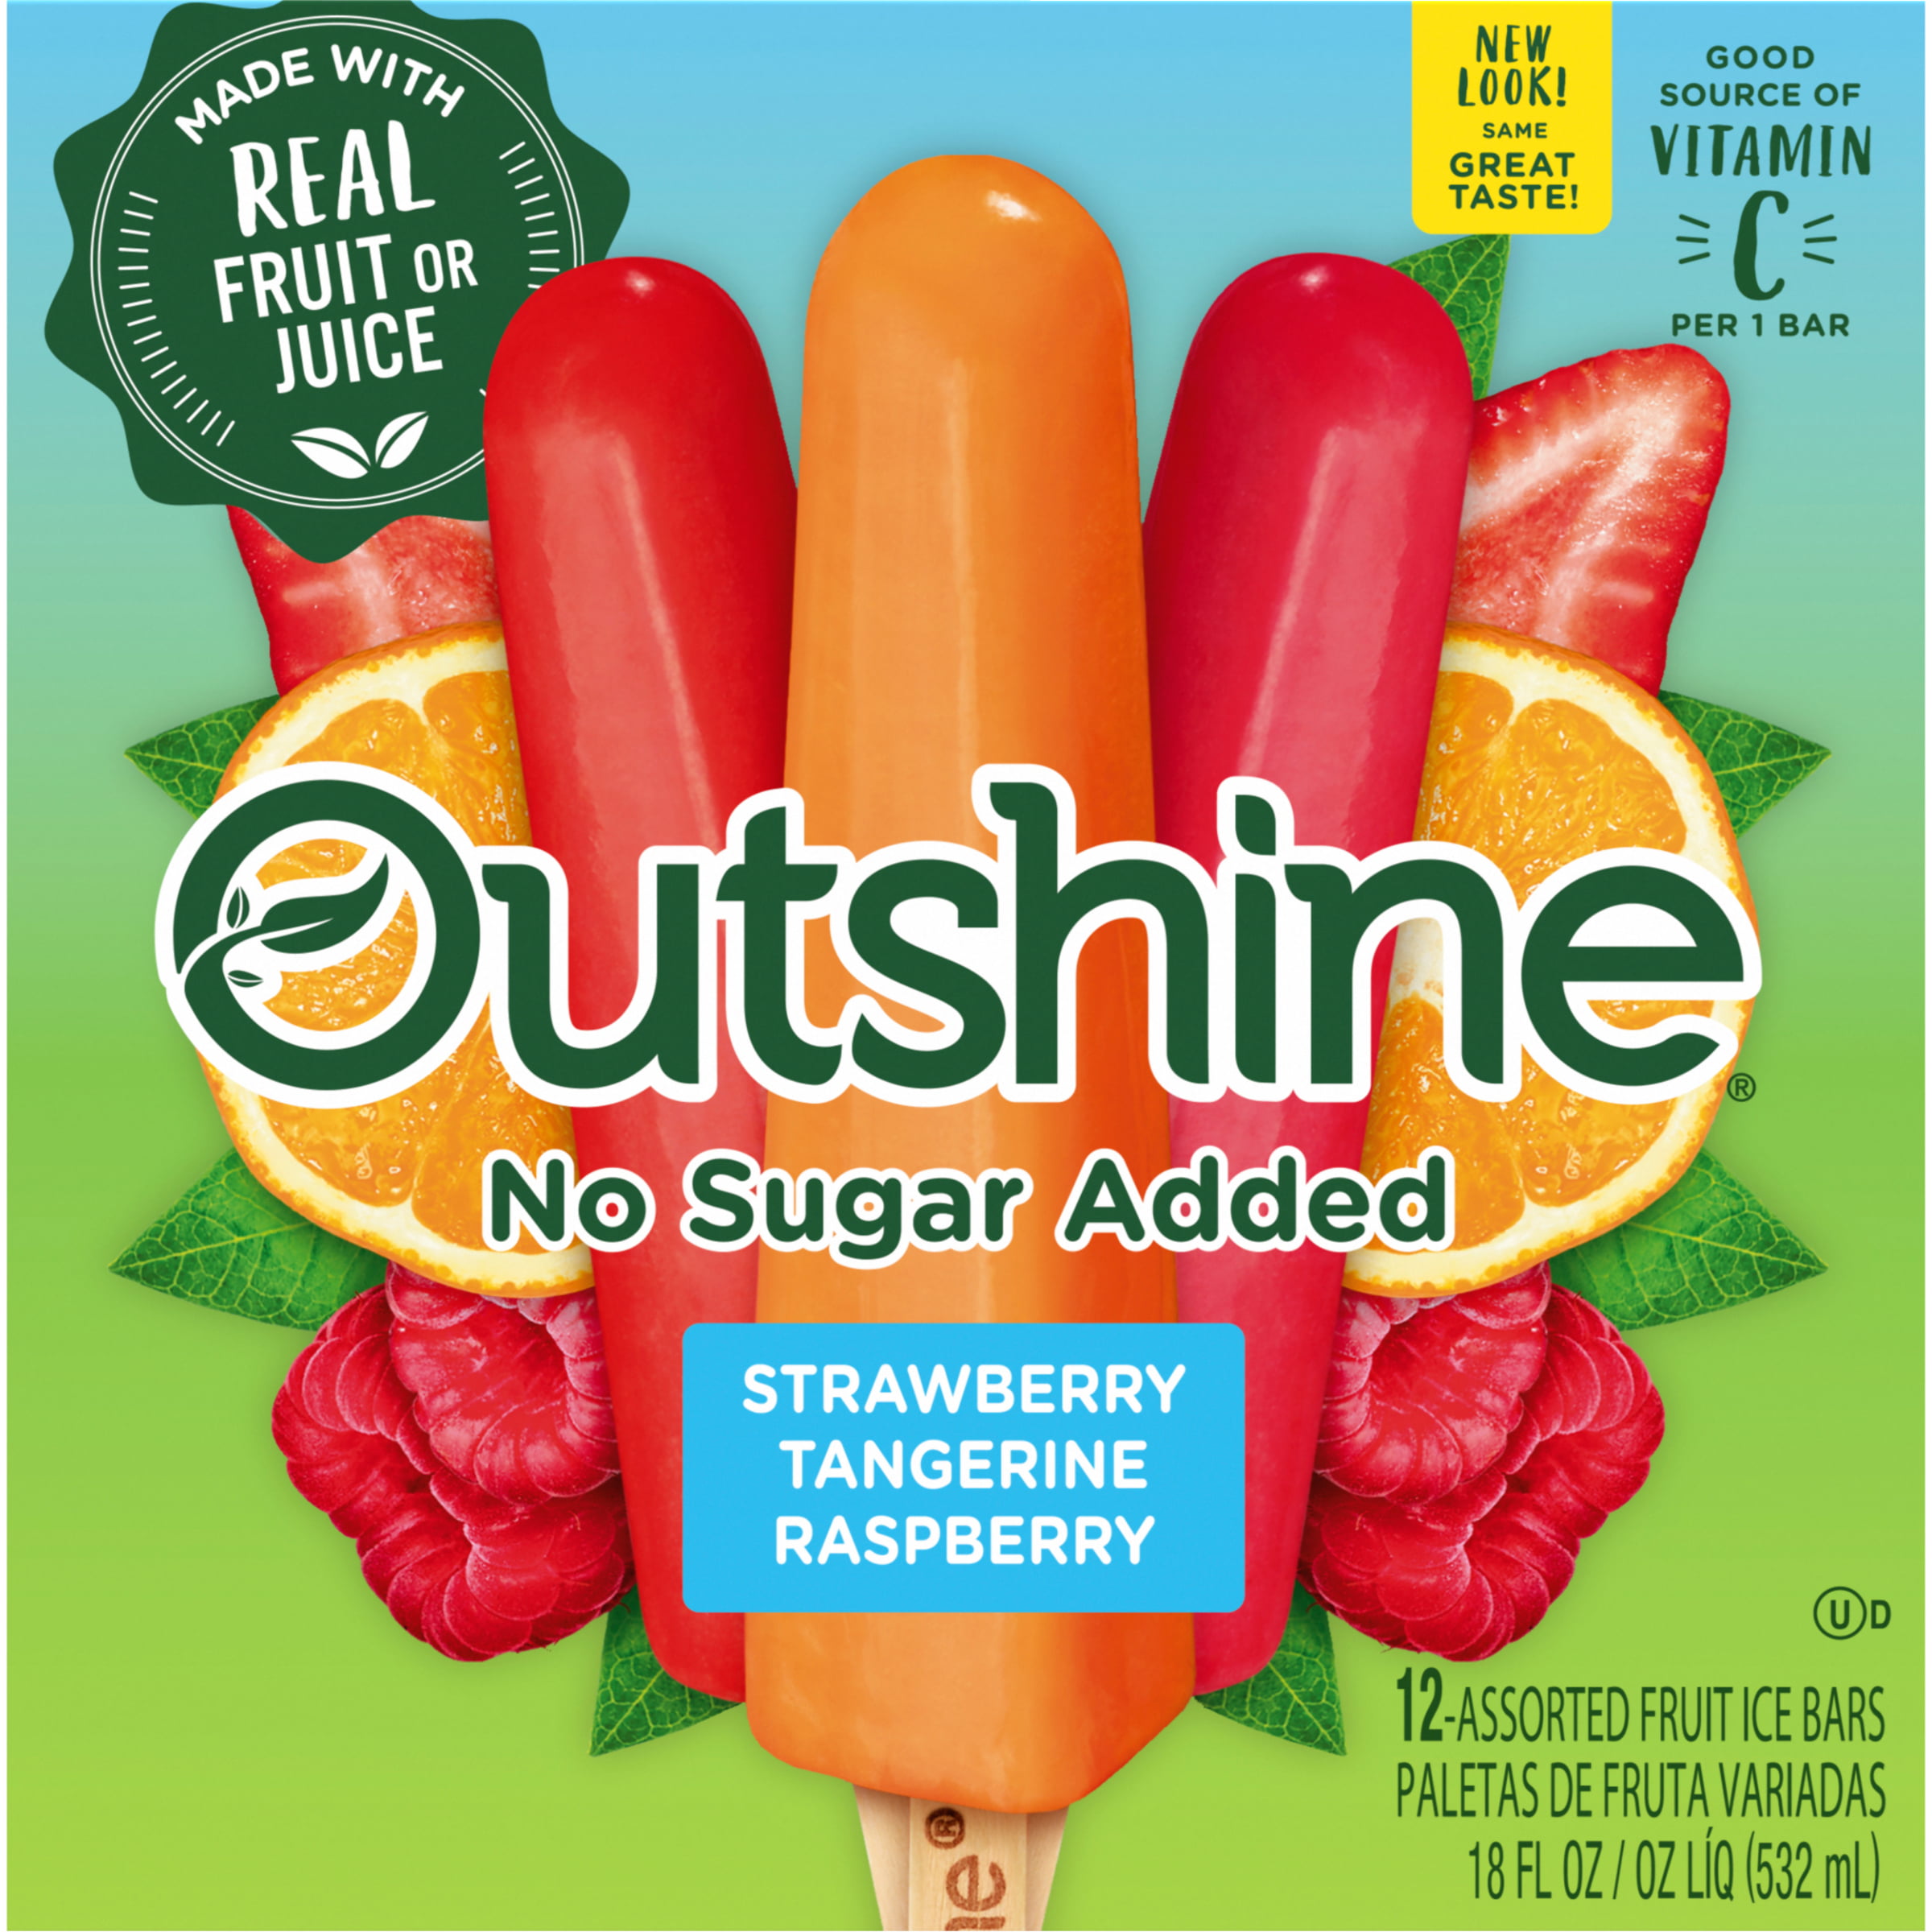 Outshine Strawberry, Tangerine, and Raspberry Frozen Fruit Bars Variety Pack, No Sugar Added, 12 Ct